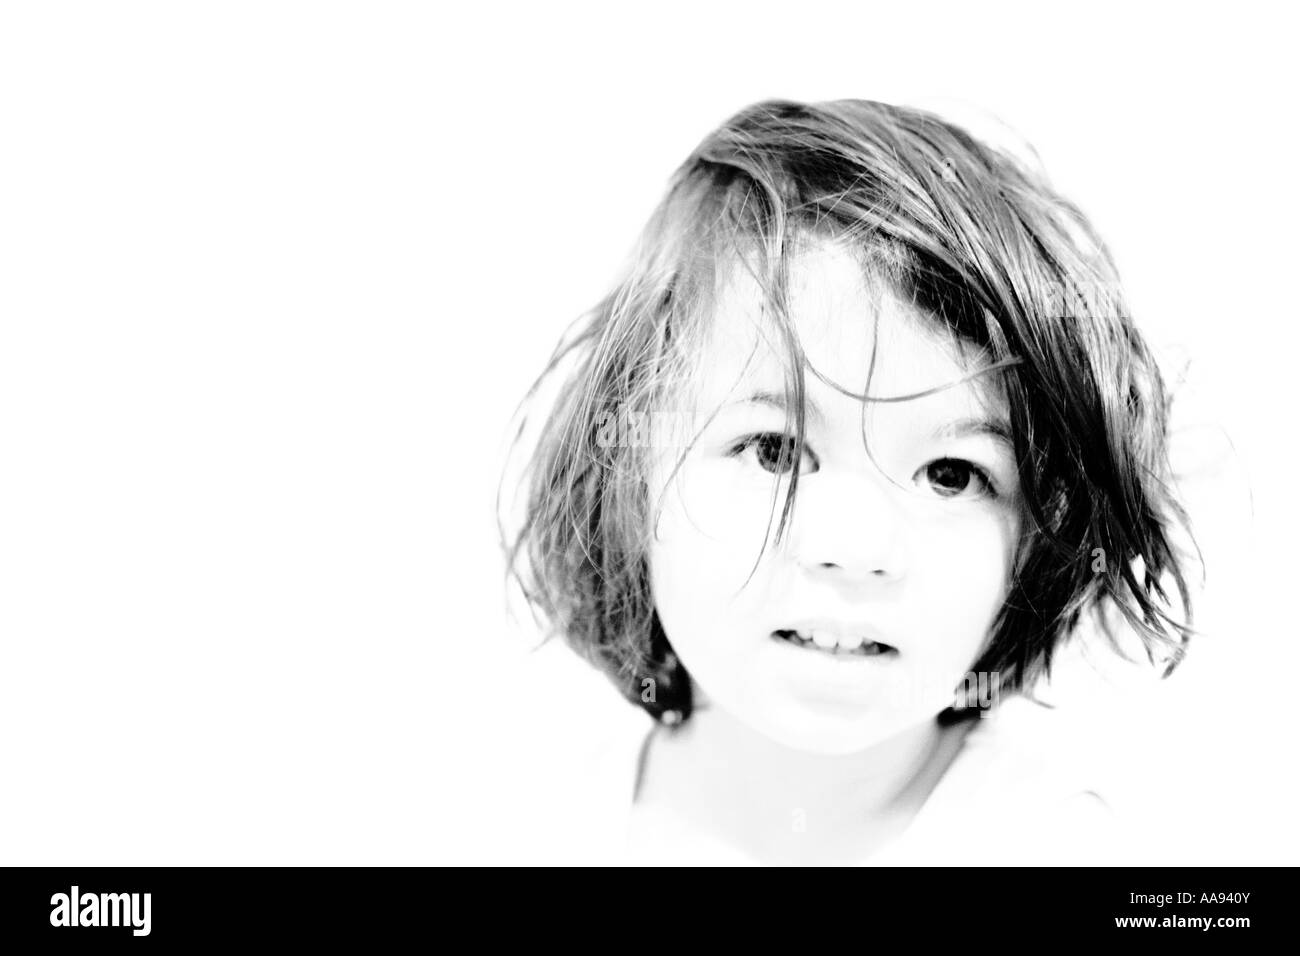 Head and shoulders high key portrait of a young girl, black and white Stock Photo